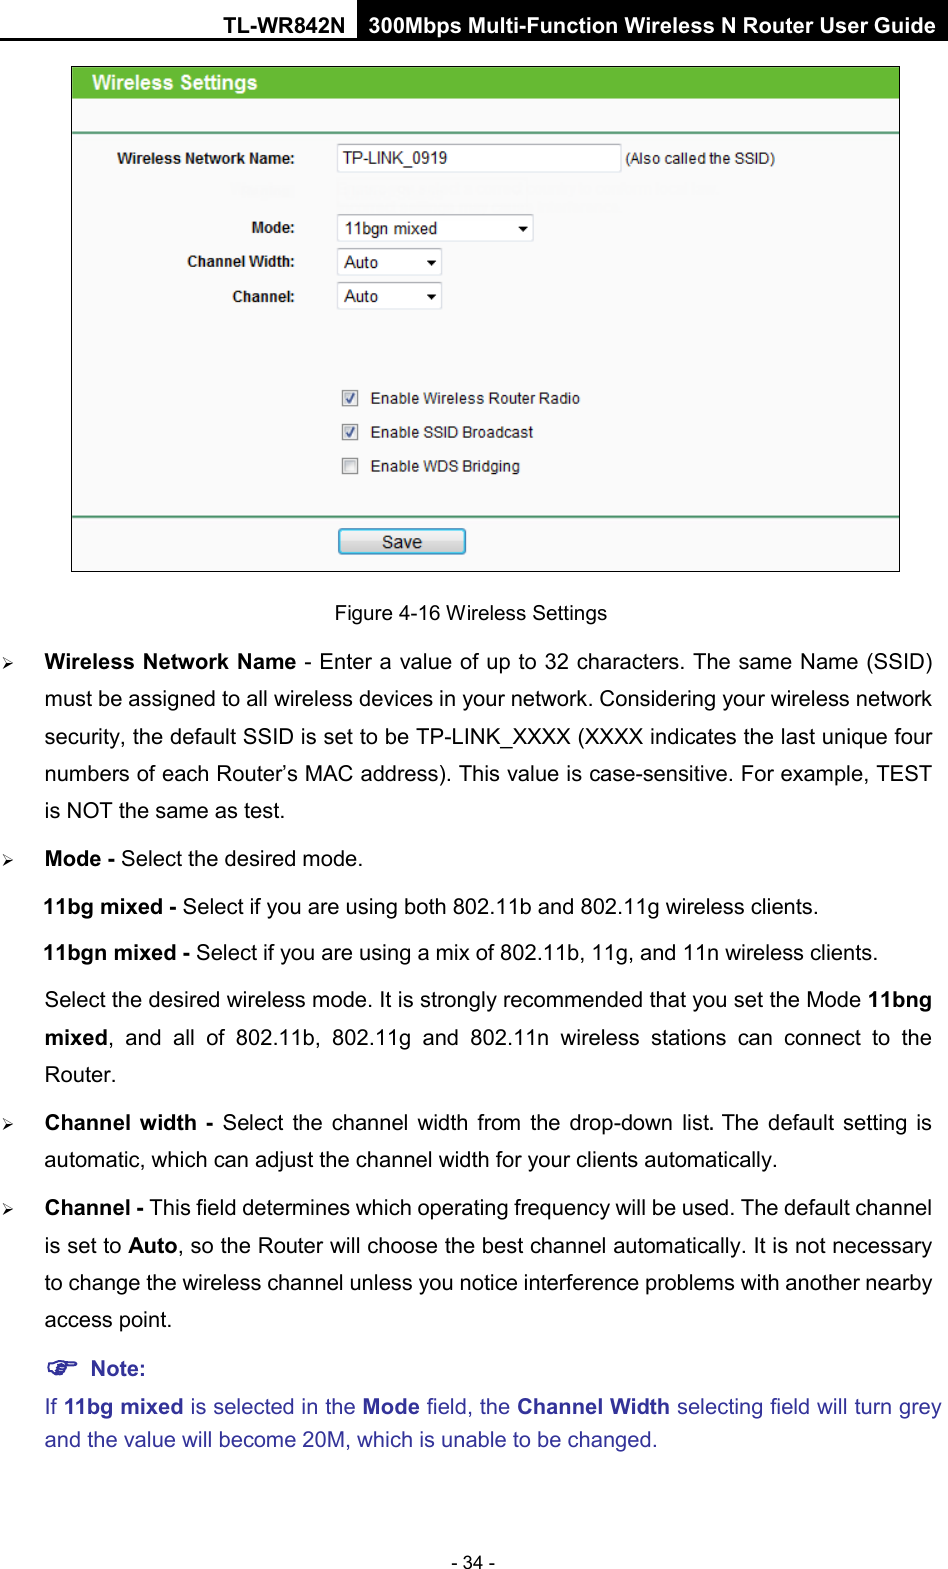 TL-WR842N 300Mbps Multi-Function Wireless N Router User Guide  - 34 -  Figure 4-16 Wireless Settings  Wireless Network Name - Enter a value of up to 32 characters. The same Name (SSID) must be assigned to all wireless devices in your network. Considering your wireless network security, the default SSID is set to be TP-LINK_XXXX (XXXX indicates the last unique four numbers of each Router’s MAC address). This value is case-sensitive. For example, TEST is NOT the same as test.  Mode - Select the desired mode.   11bg mixed - Select if you are using both 802.11b and 802.11g wireless clients. 11bgn mixed - Select if you are using a mix of 802.11b, 11g, and 11n wireless clients. Select the desired wireless mode. It is strongly recommended that you set the Mode 11bng mixed, and all of 802.11b, 802.11g and 802.11n wireless stations can connect to the Router.  Channel width -  Select  the channel width from the drop-down list. The default setting is automatic, which can adjust the channel width for your clients automatically.  Channel - This field determines which operating frequency will be used. The default channel is set to Auto, so the Router will choose the best channel automatically. It is not necessary to change the wireless channel unless you notice interference problems with another nearby access point.  Note:   If 11bg mixed is selected in the Mode field, the Channel Width selecting field will turn grey and the value will become 20M, which is unable to be changed.   